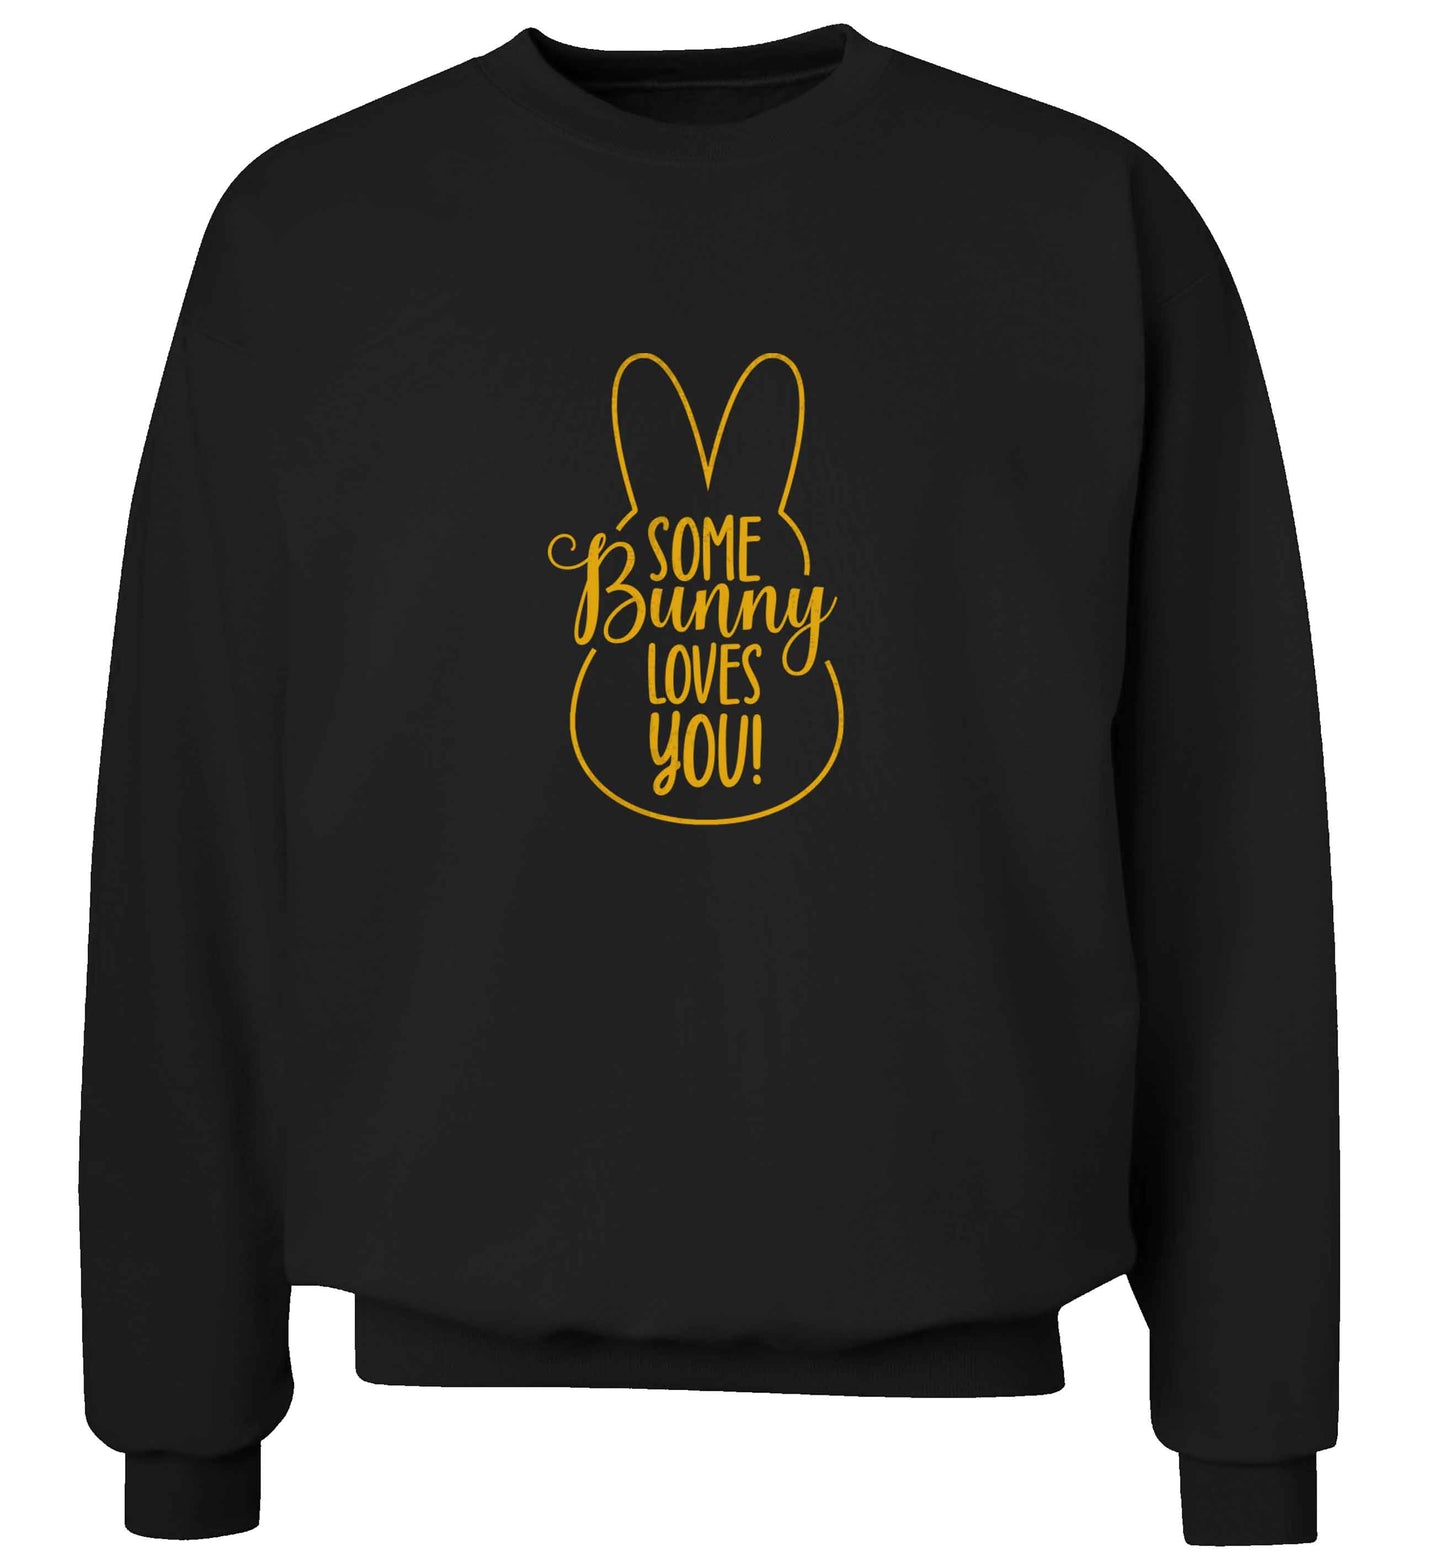 Some bunny loves you adult's unisex black sweater 2XL